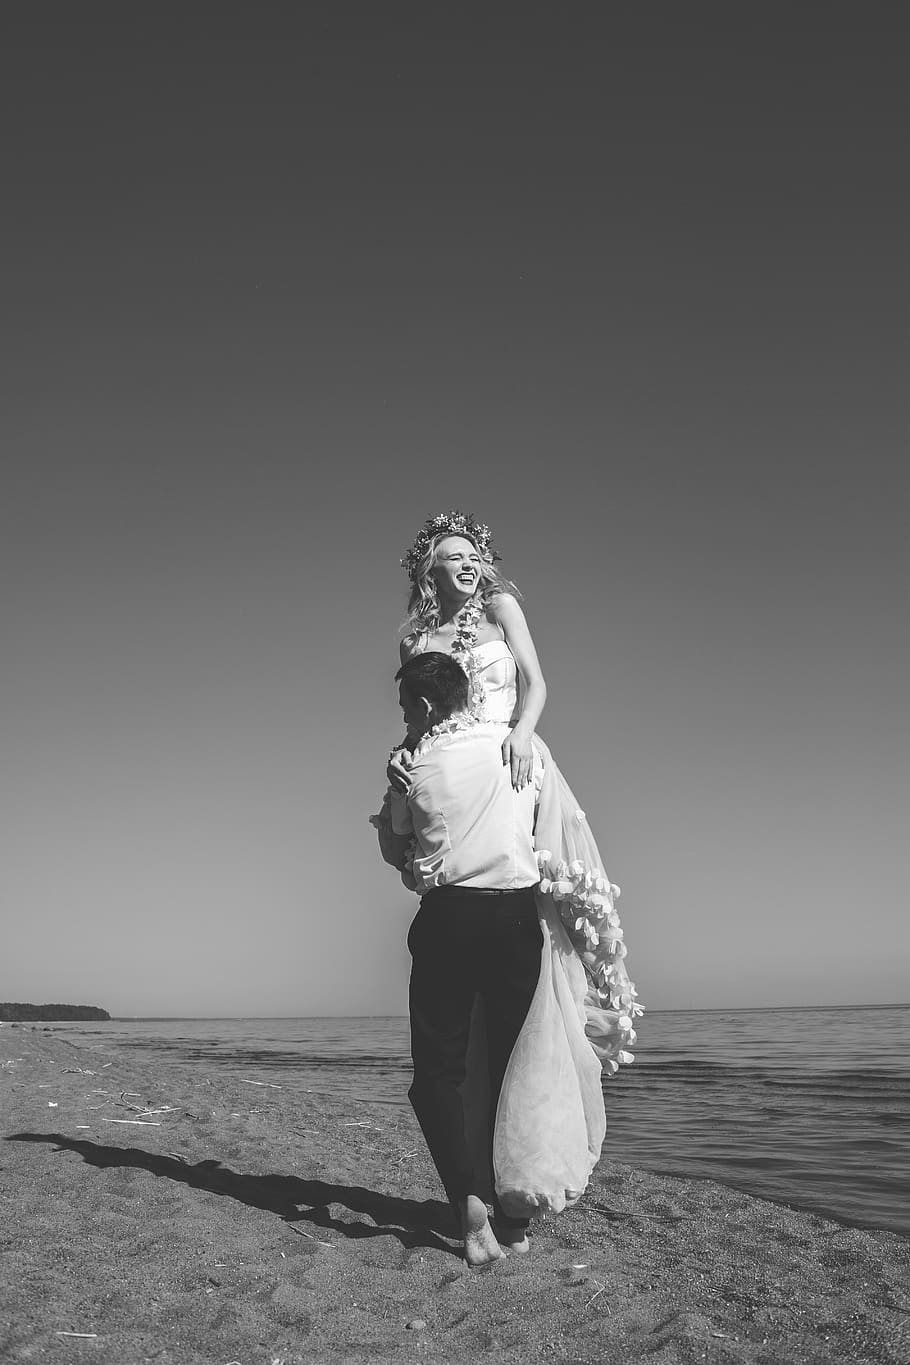 wedding, marriage, wife, sea, travel, love, glad, nature, one person, full length